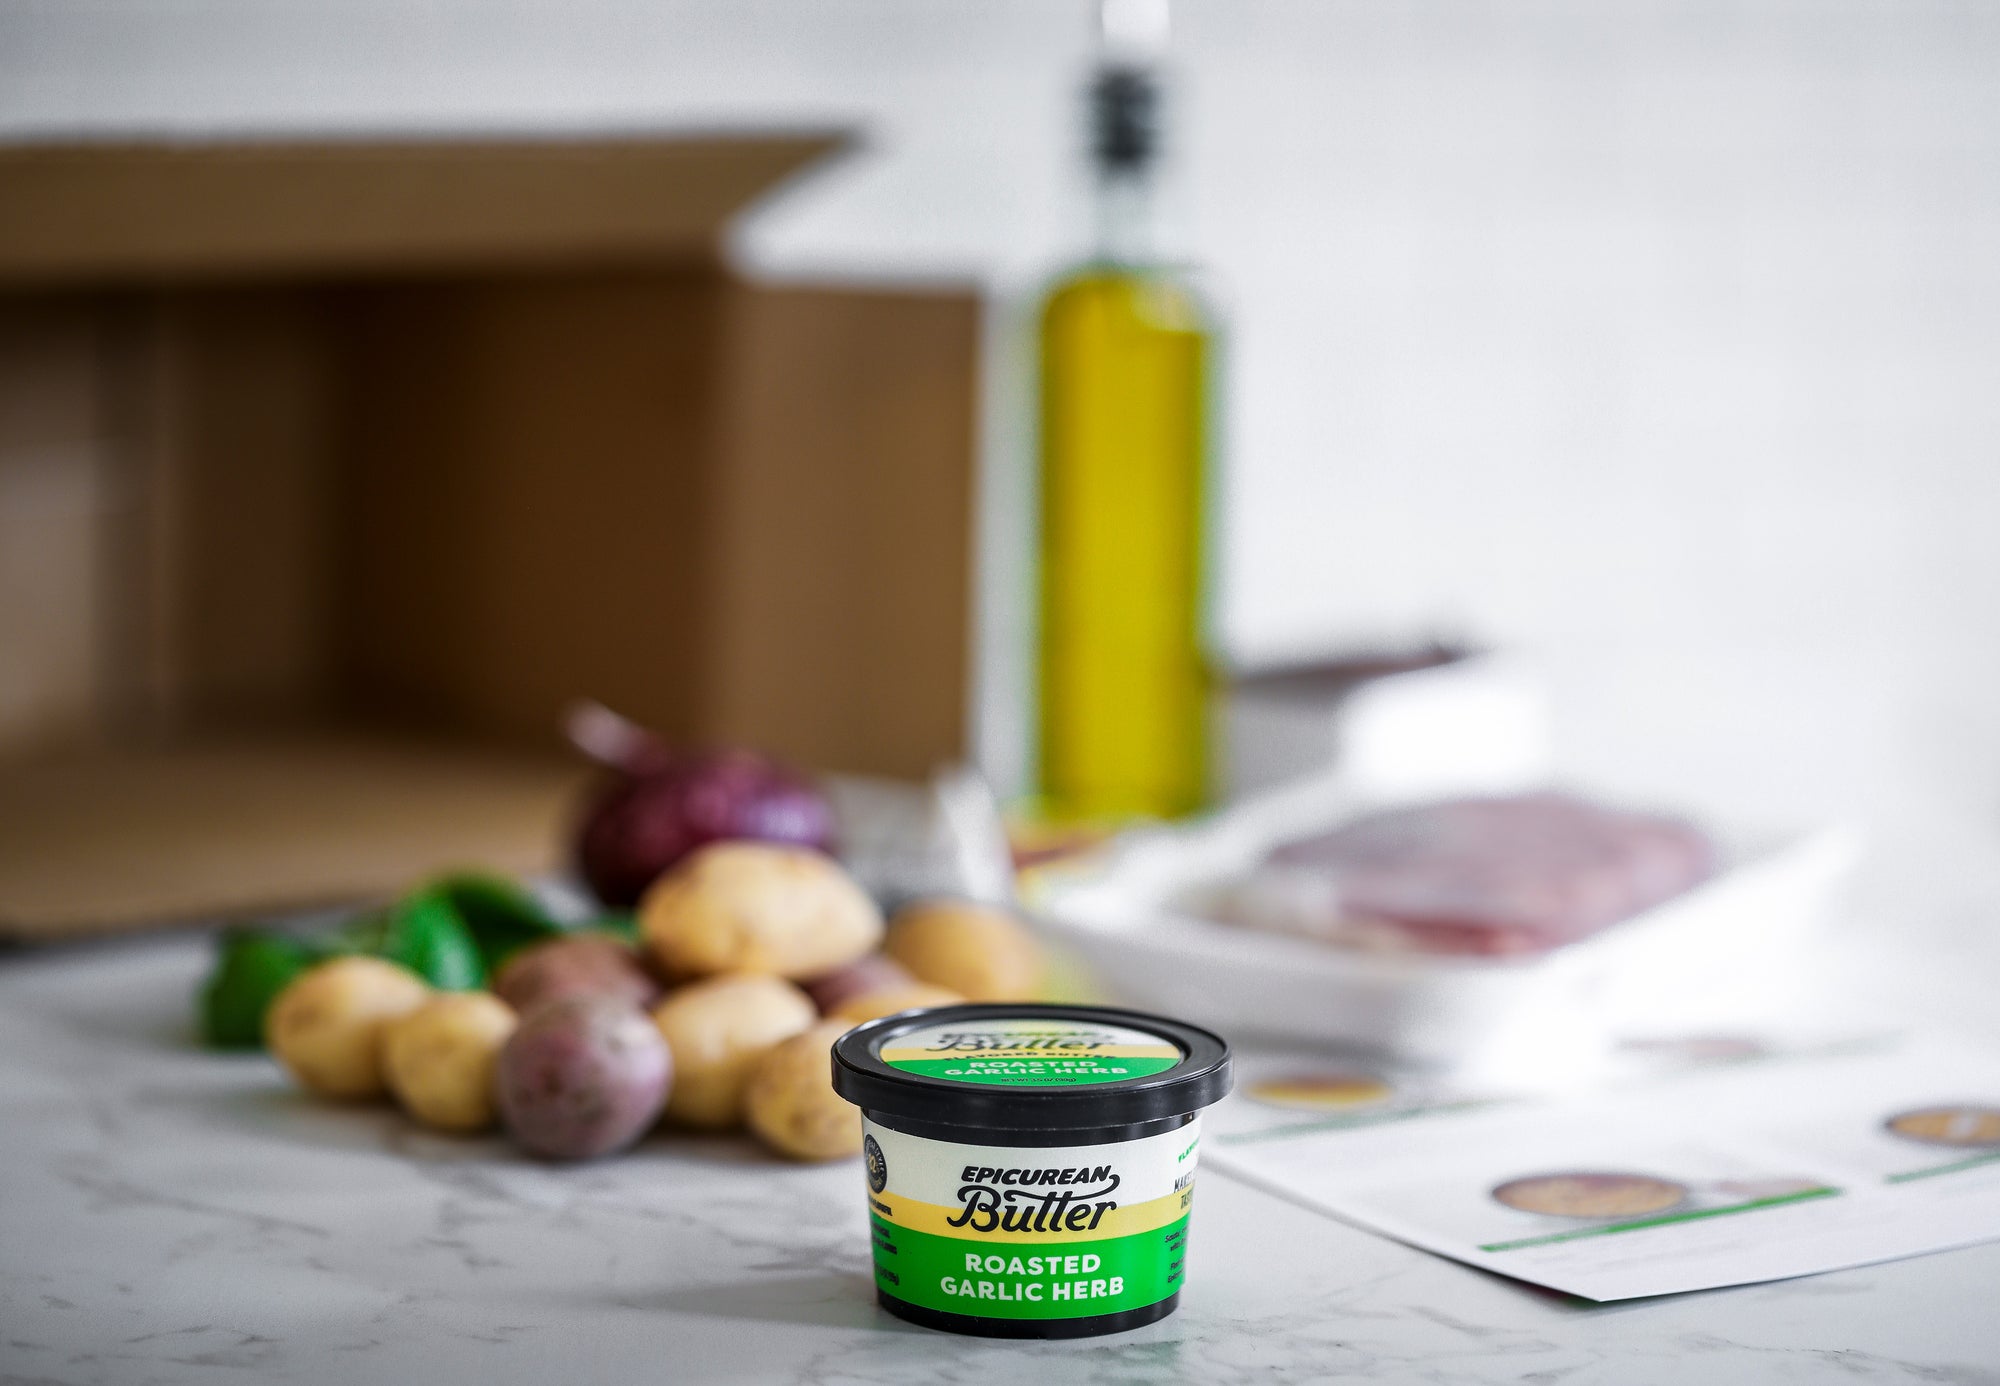 Epicurean Butter tub included in meal kit